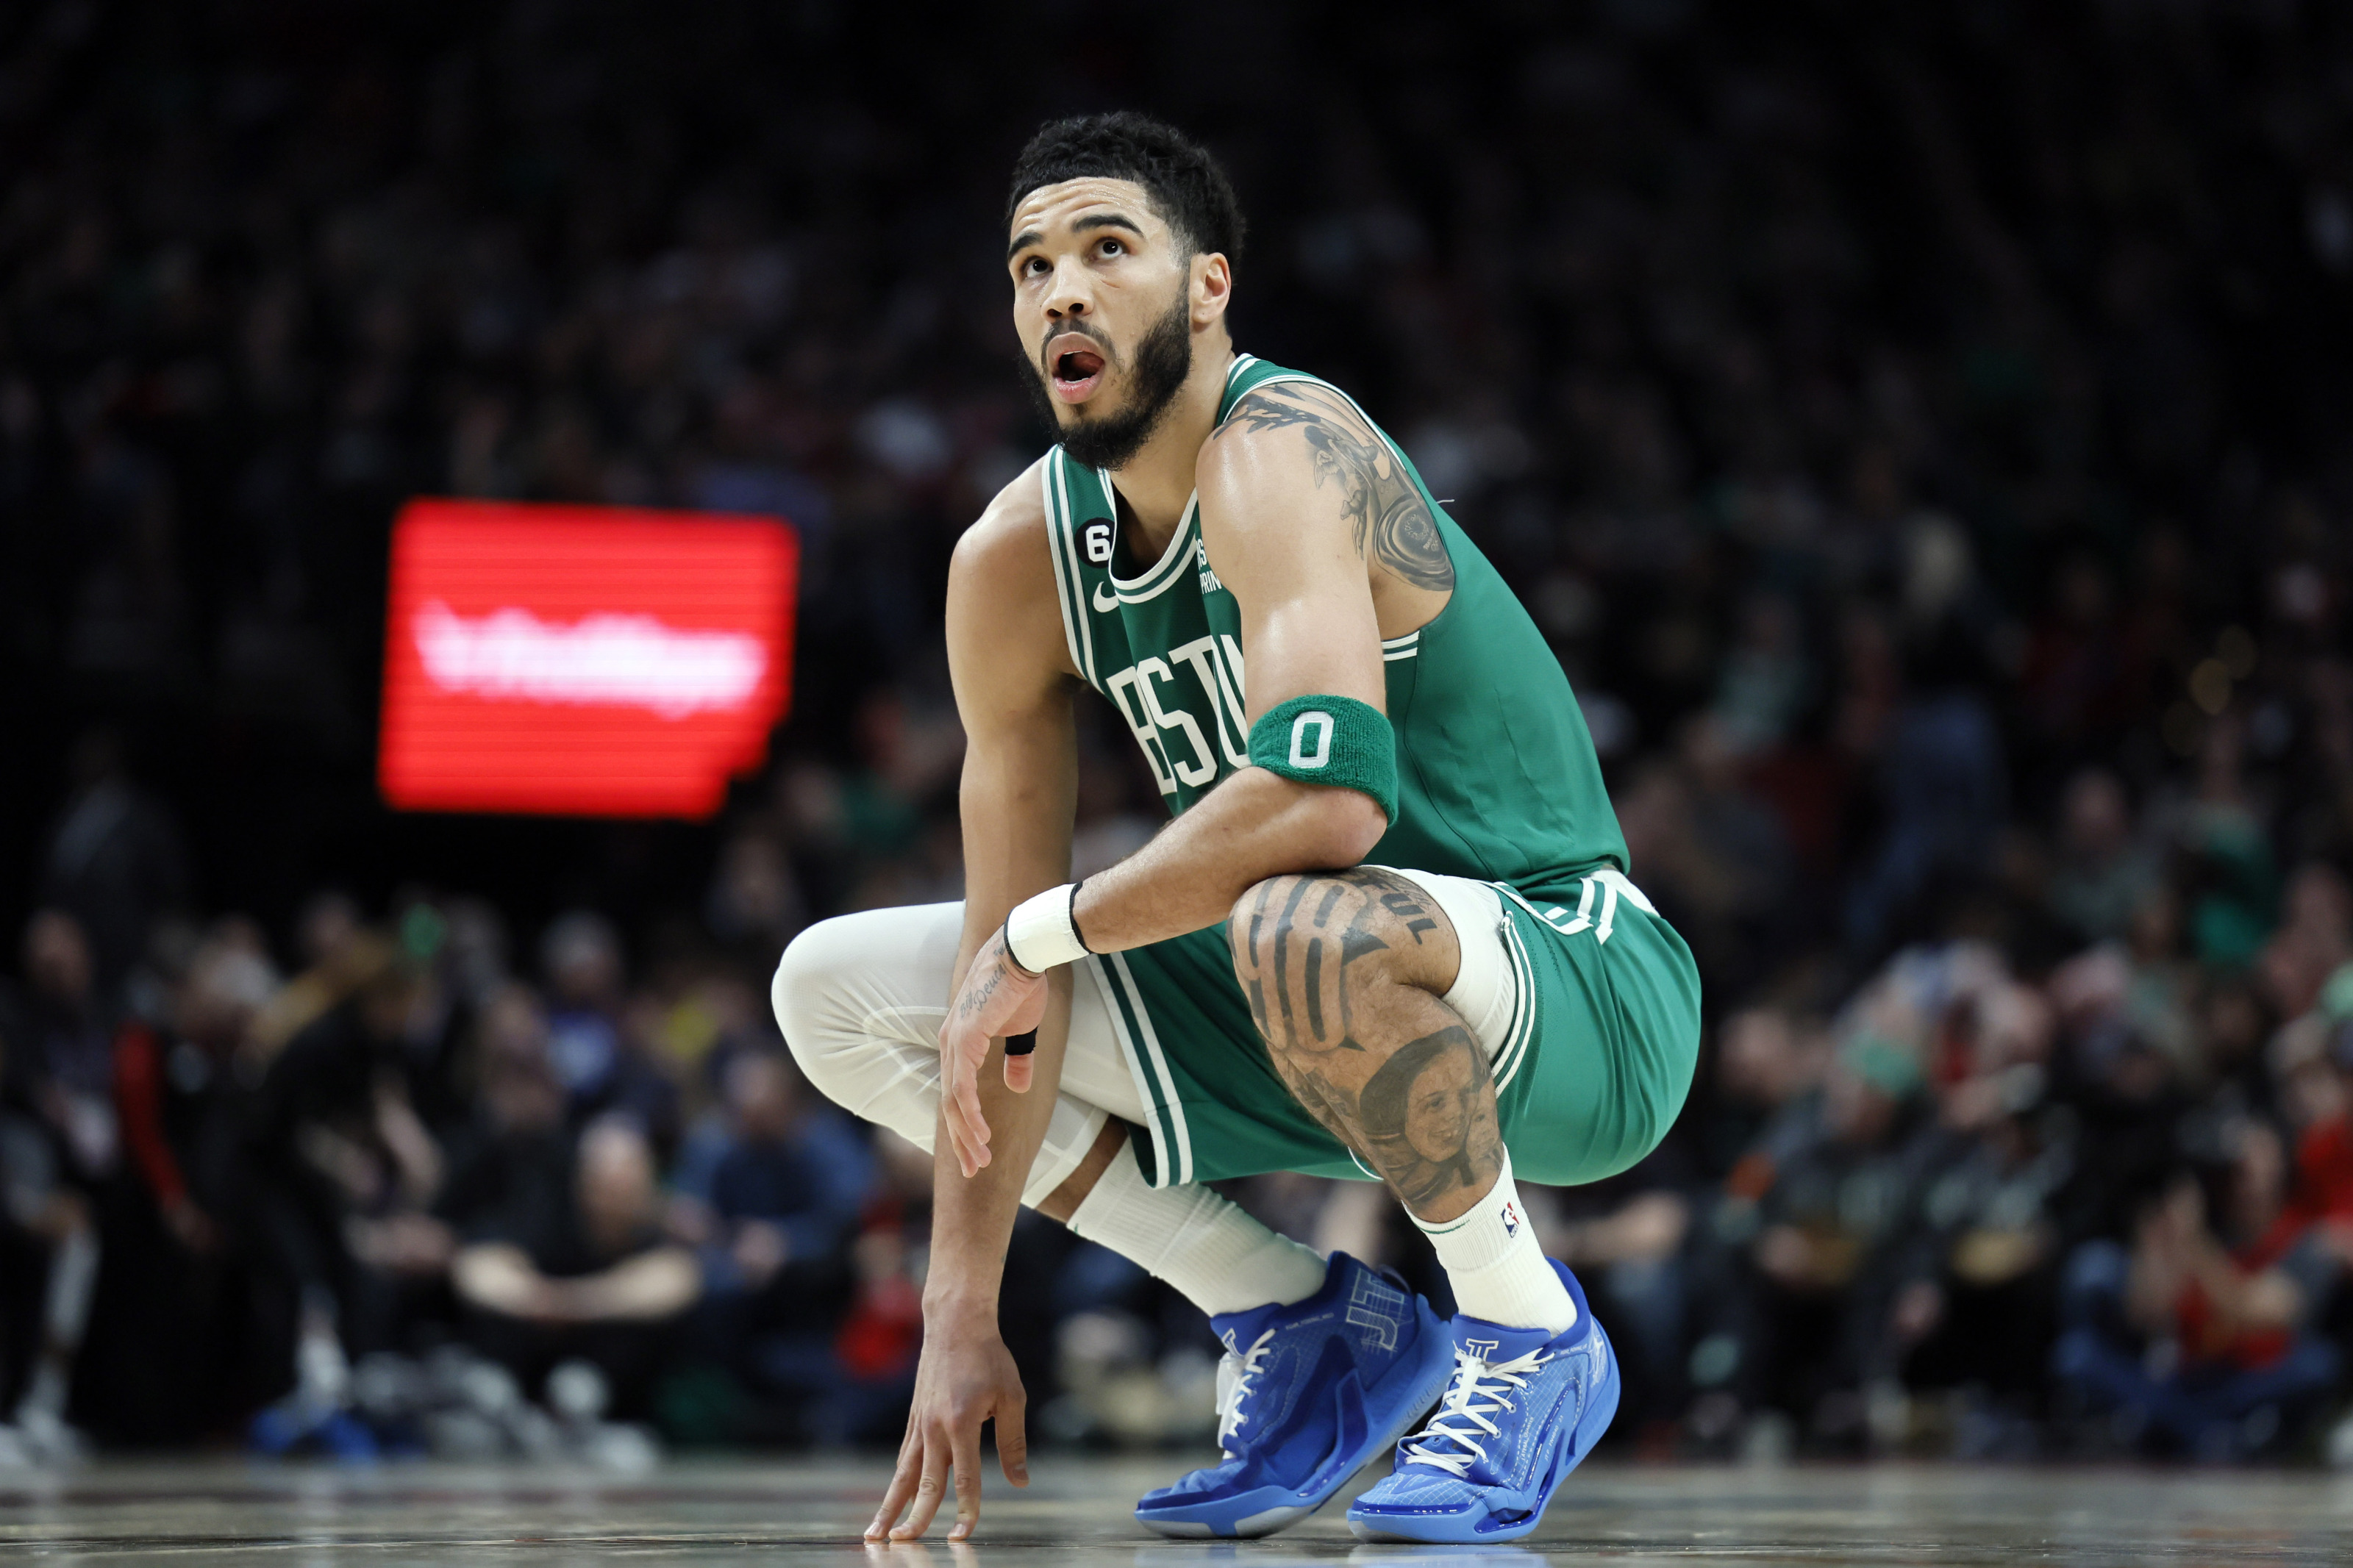 Analyst The Boston Celtics have become a chore to watch